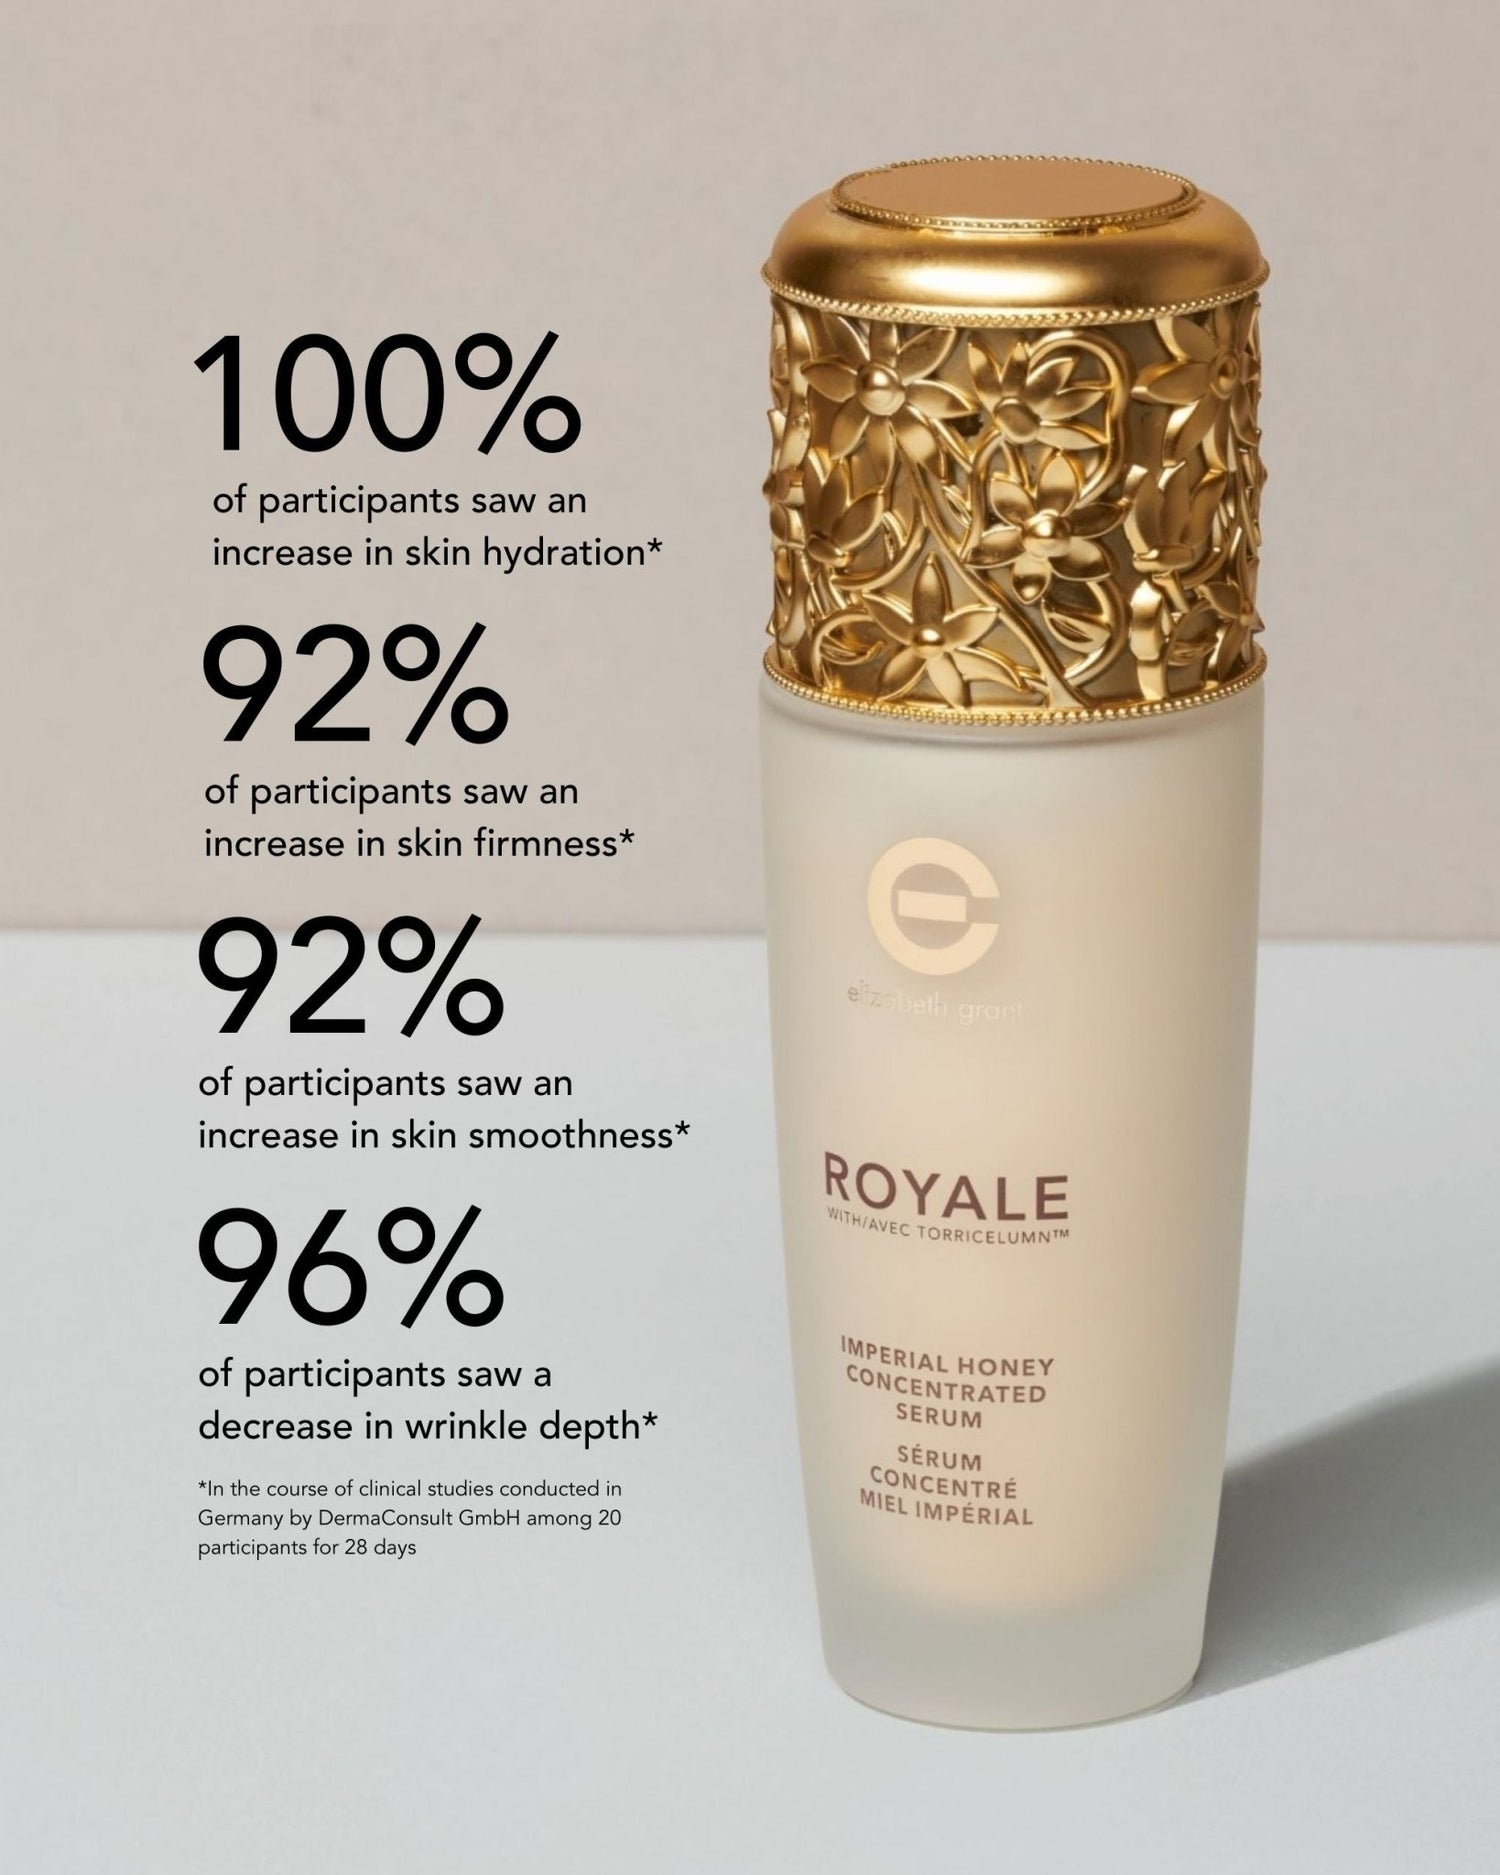 Royale Imperial Honey Concentrated Serum - Elizabeth Grant Skin Care